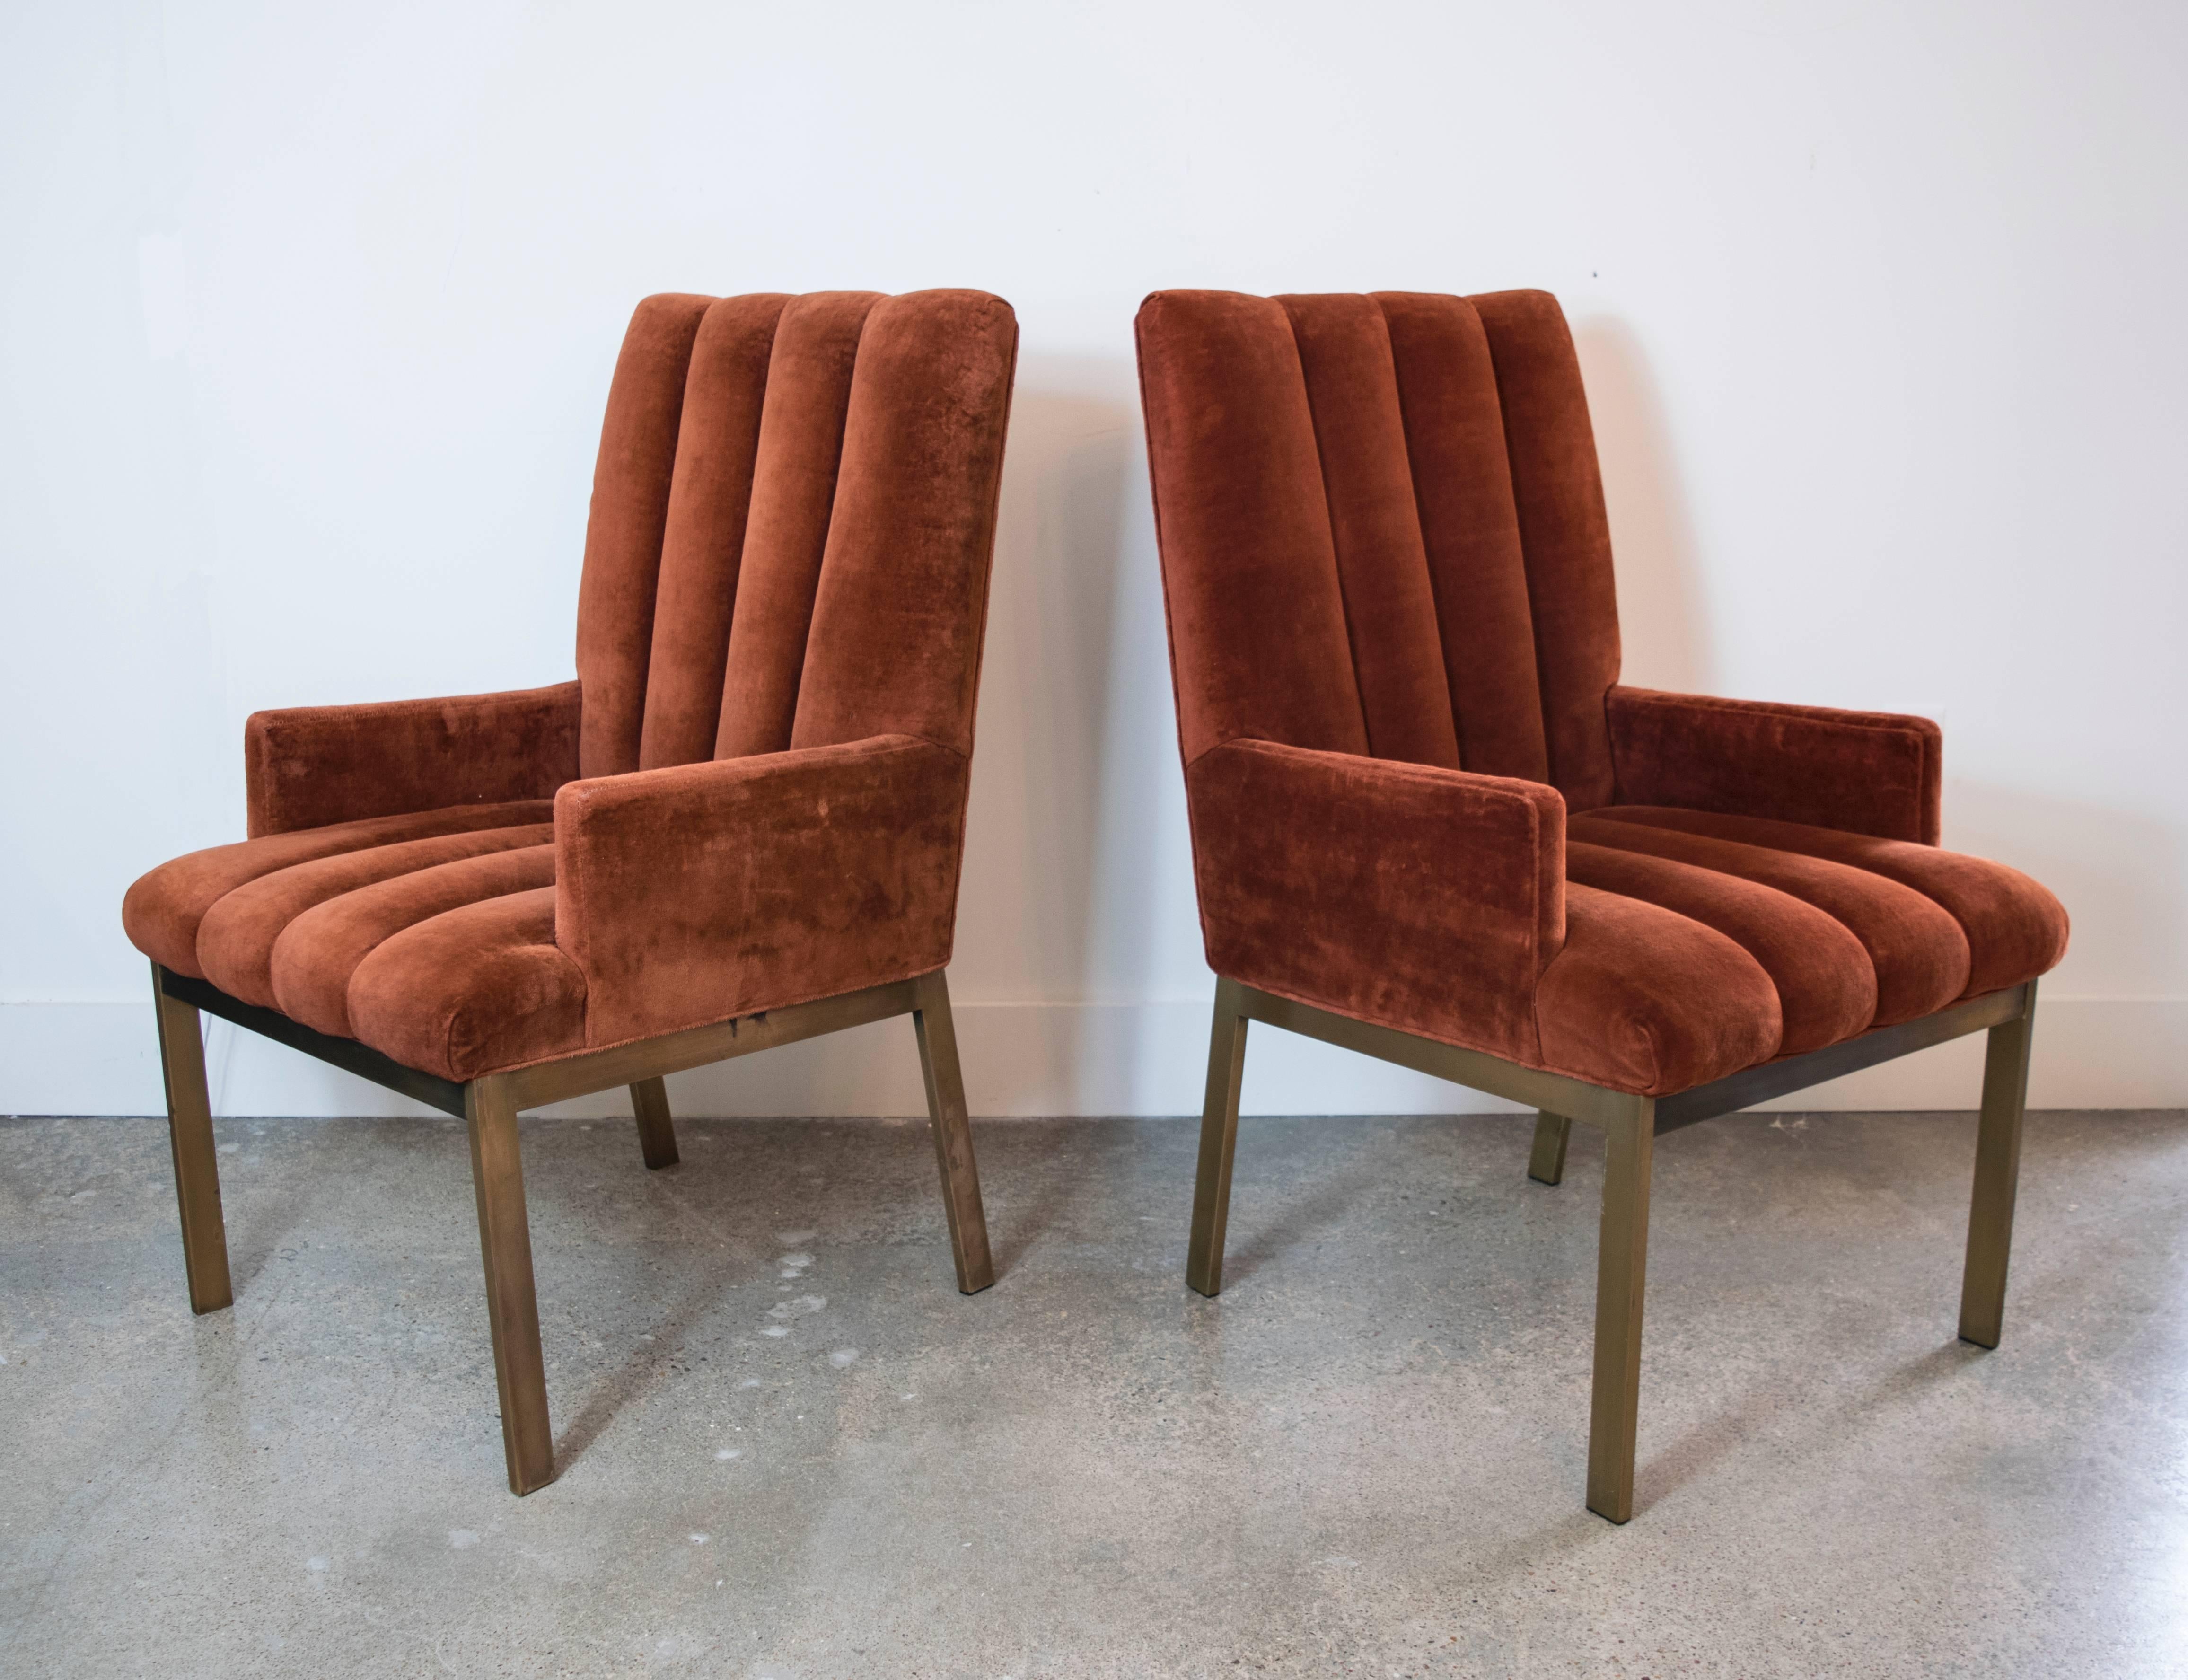 Elegant armchairs with tailored brass/bronze bases and channel tufting in the original rust velvet upholstery. They can be reupholstered in client's fabric for an additional charge.